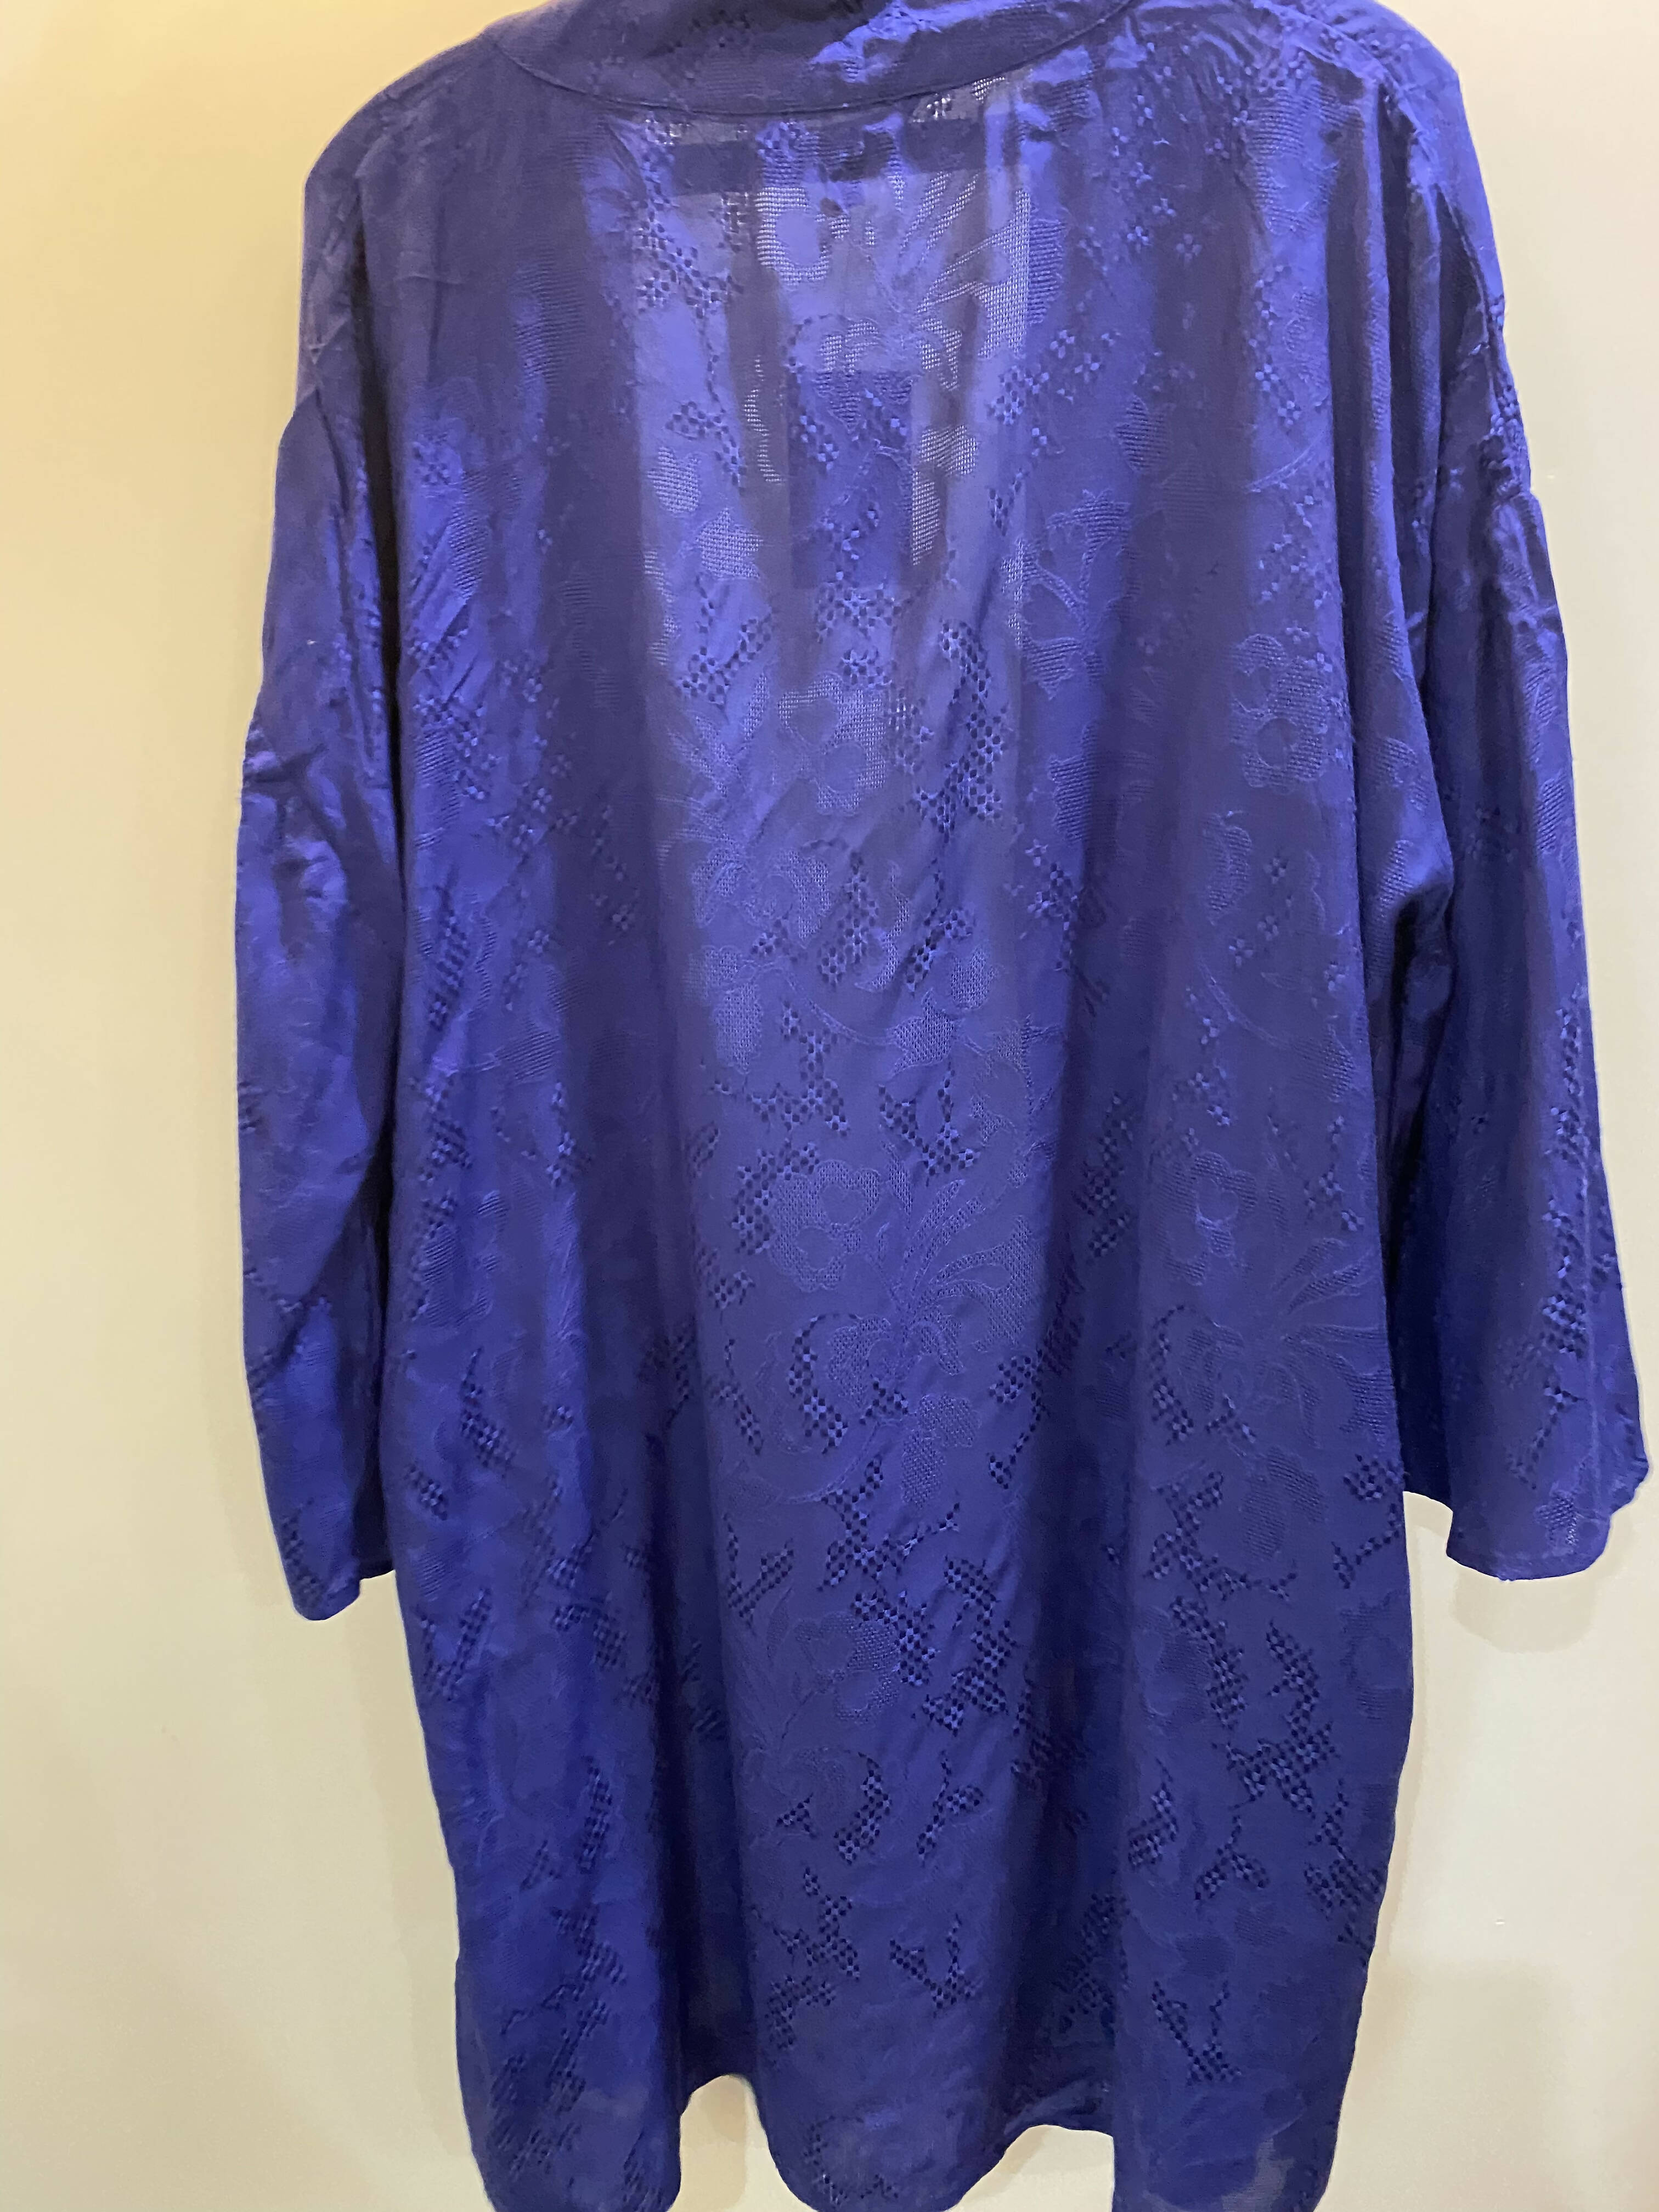 Next |Blue Color Women Kimono | Women Branded Formals | Brand New With Tags